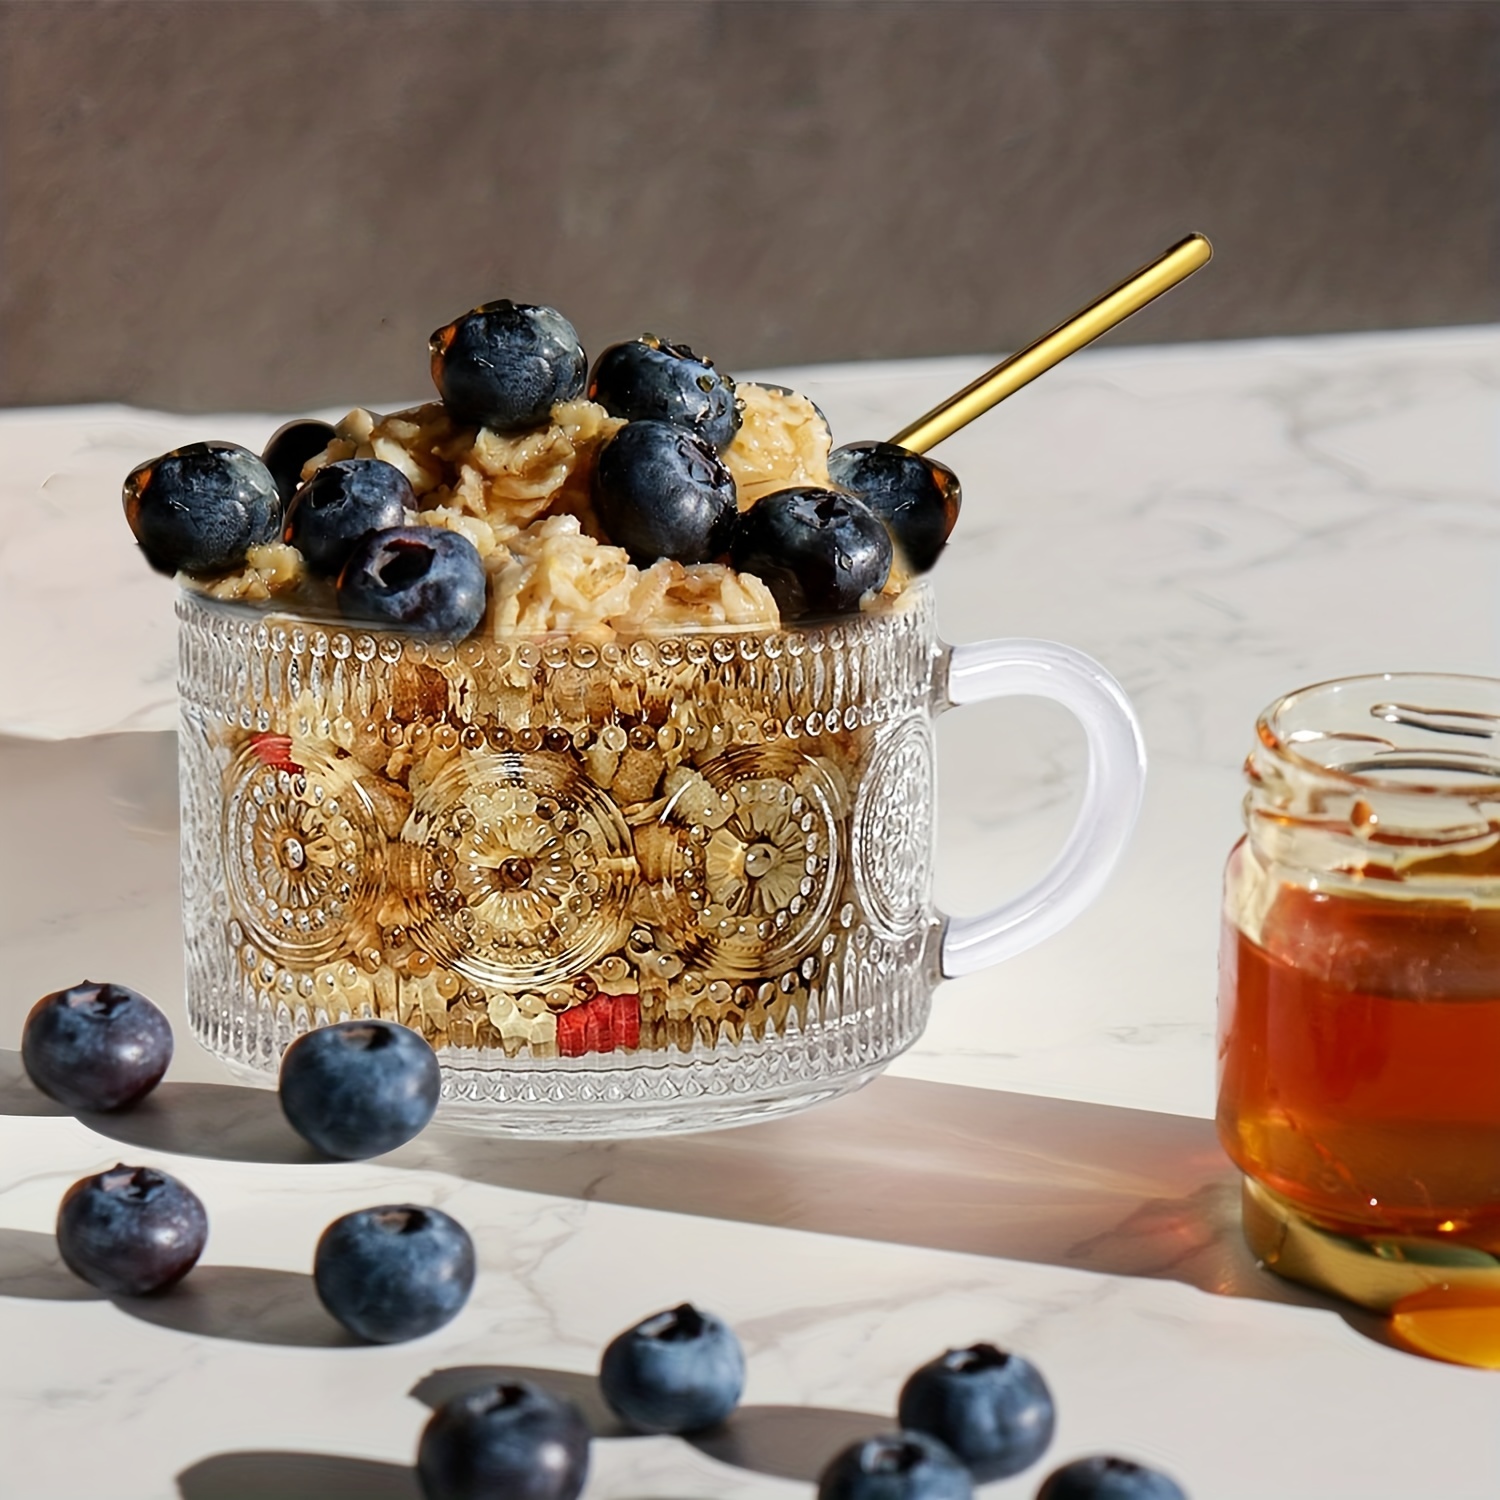 Oatmeal Breakfast Large Capacity Glass Bowl Water Cup with Lid